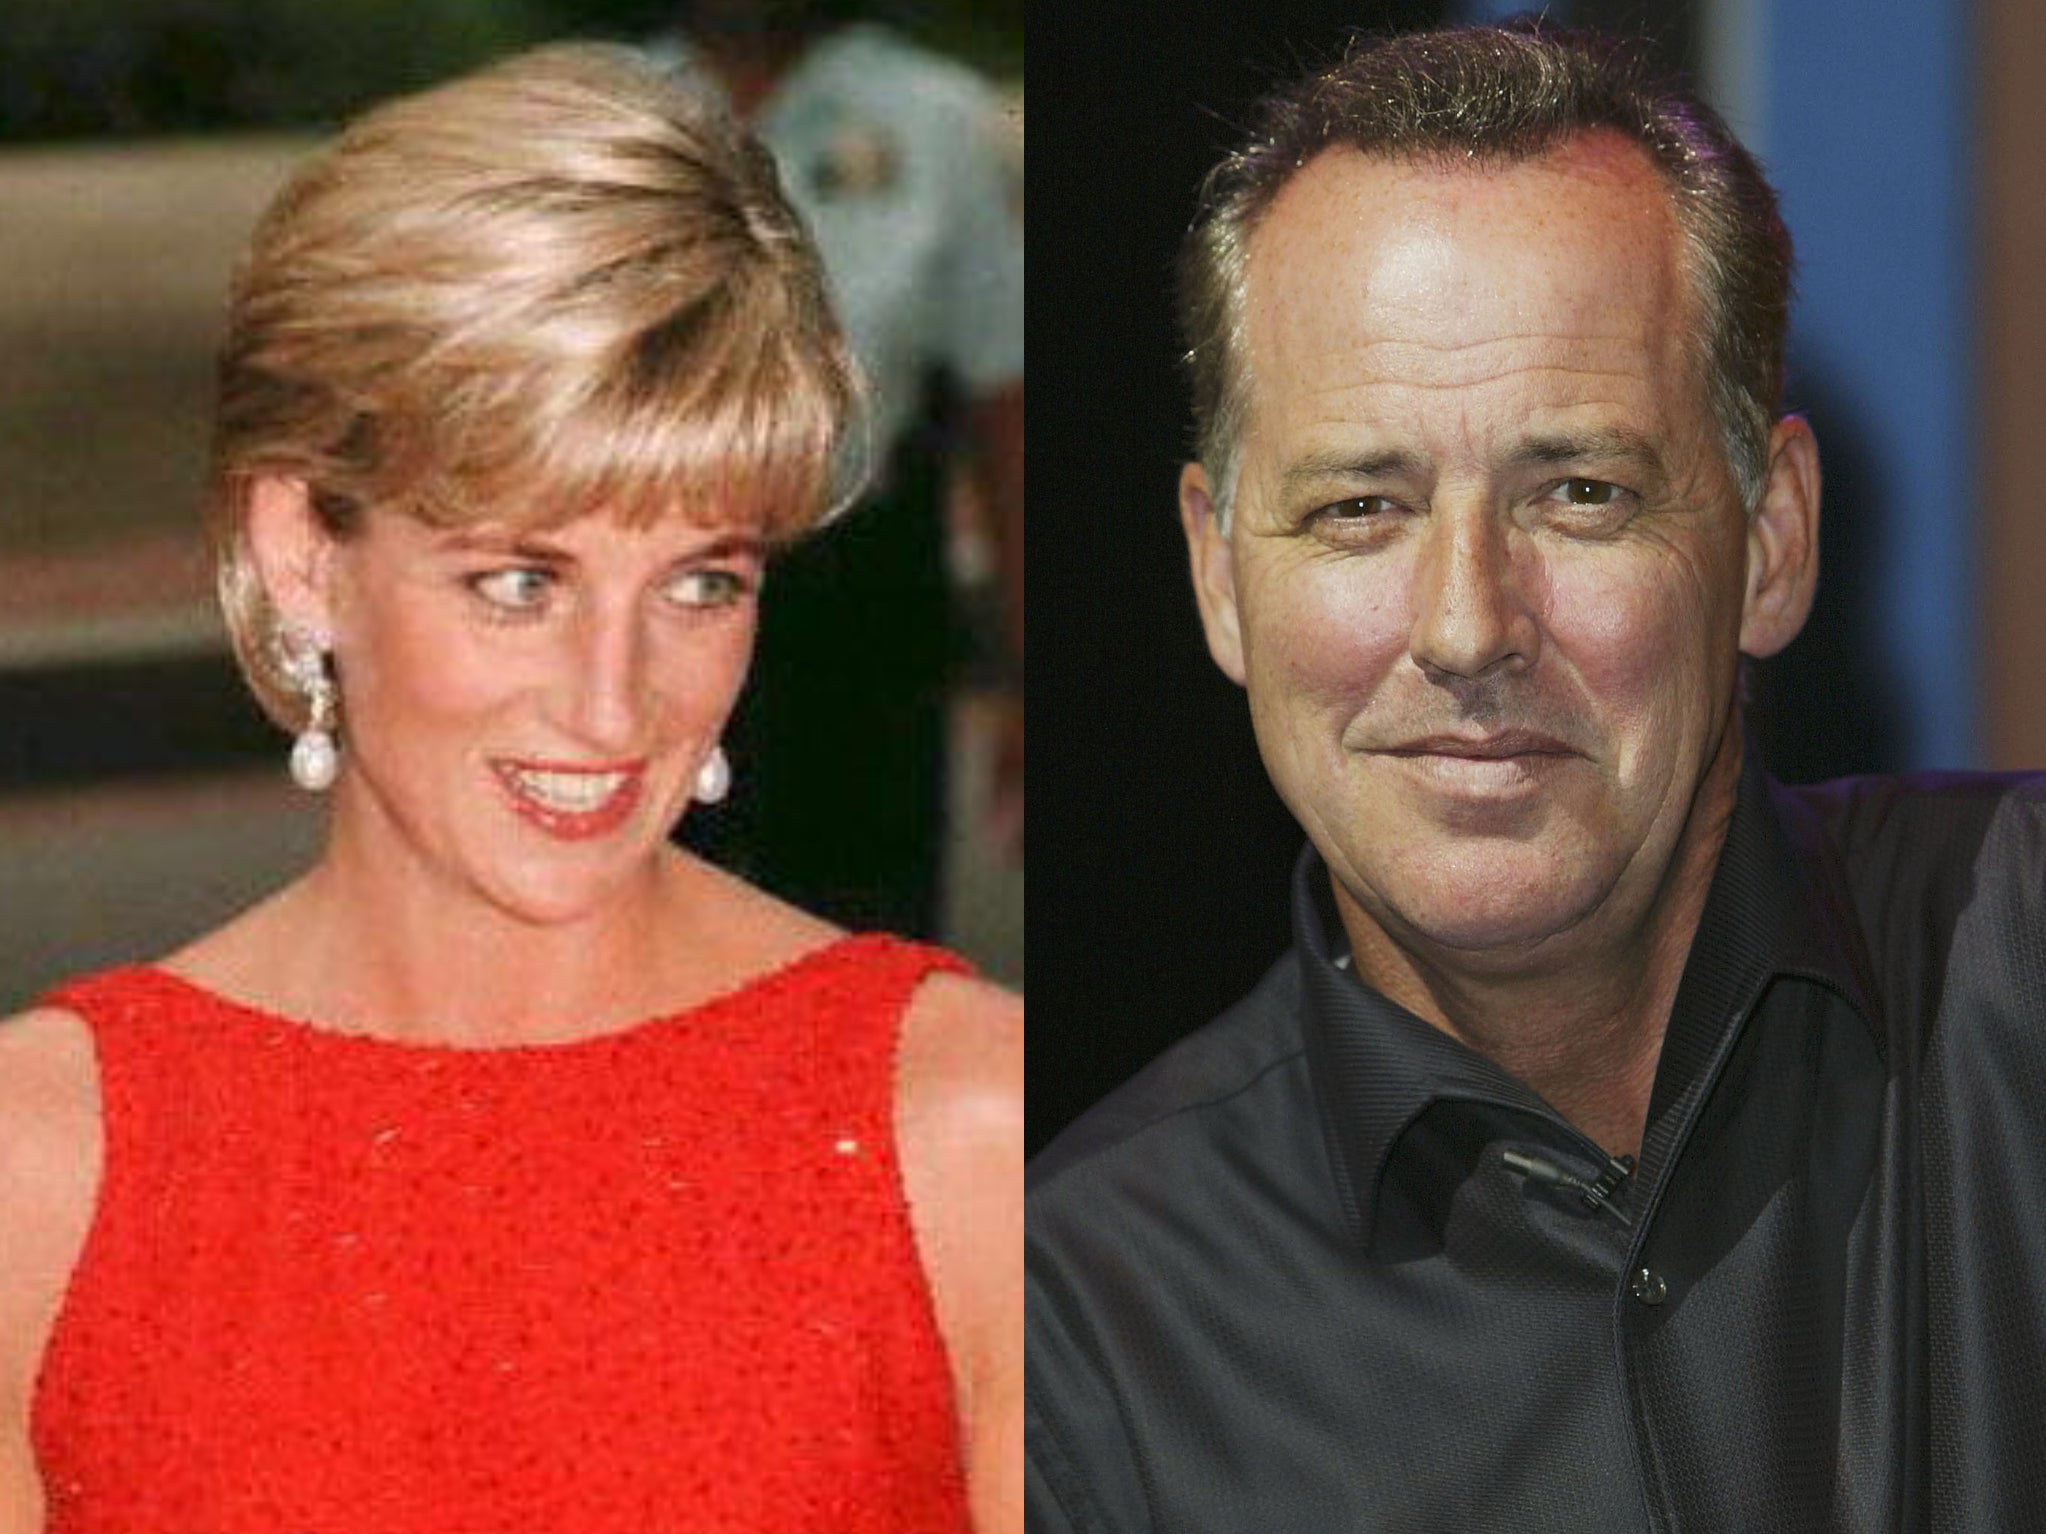 Princess Diana and Michael Barrymore met ‘secretly’ in 1997, letters suggest